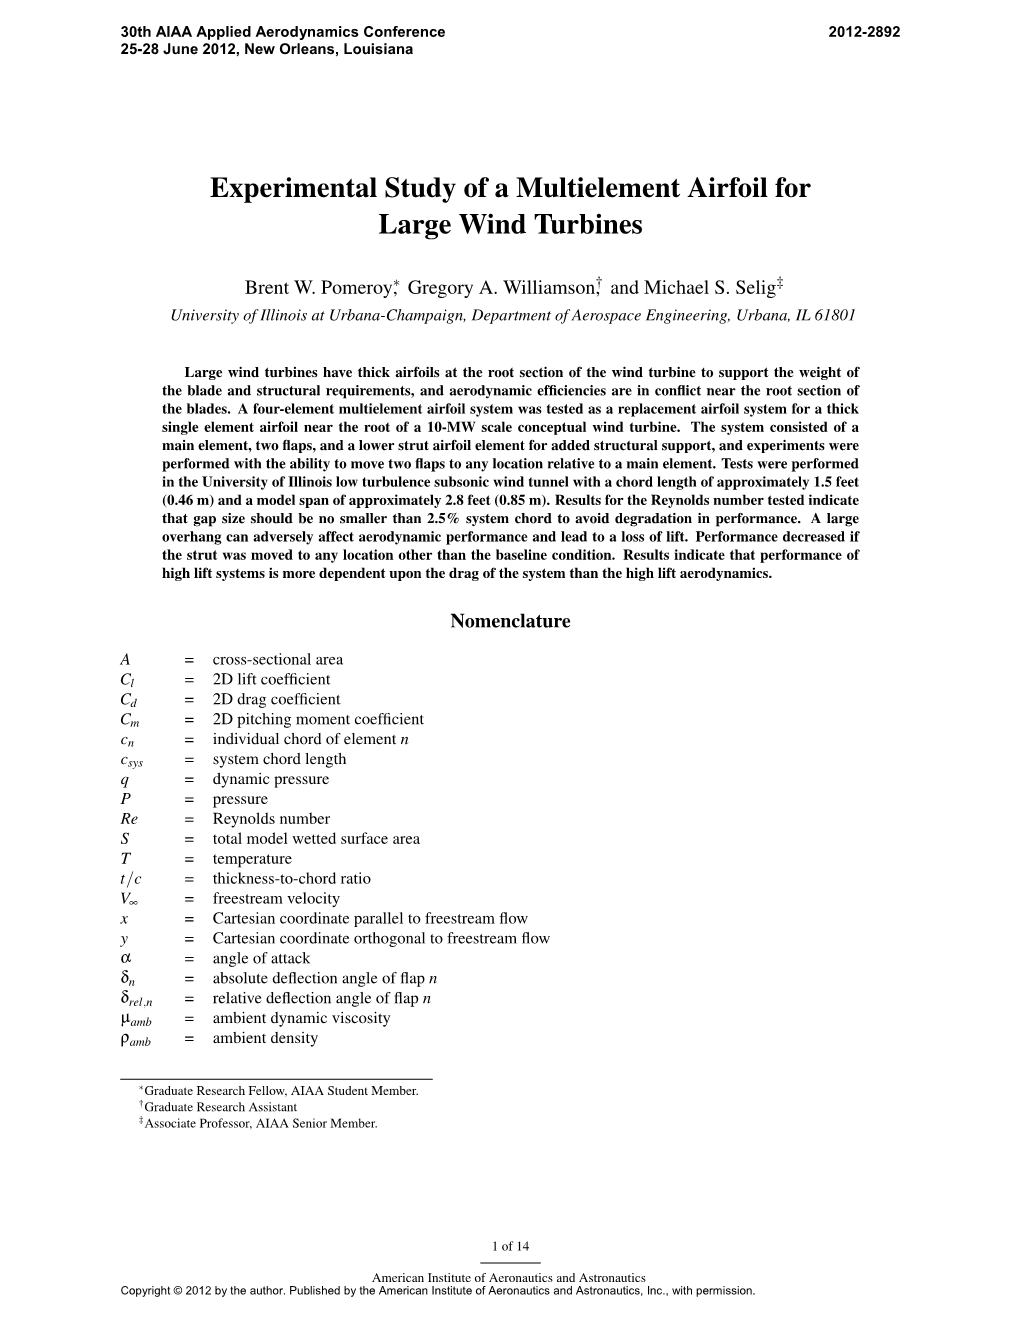 Experimental Study of a Multielement Airfoil for Large Wind Turbines